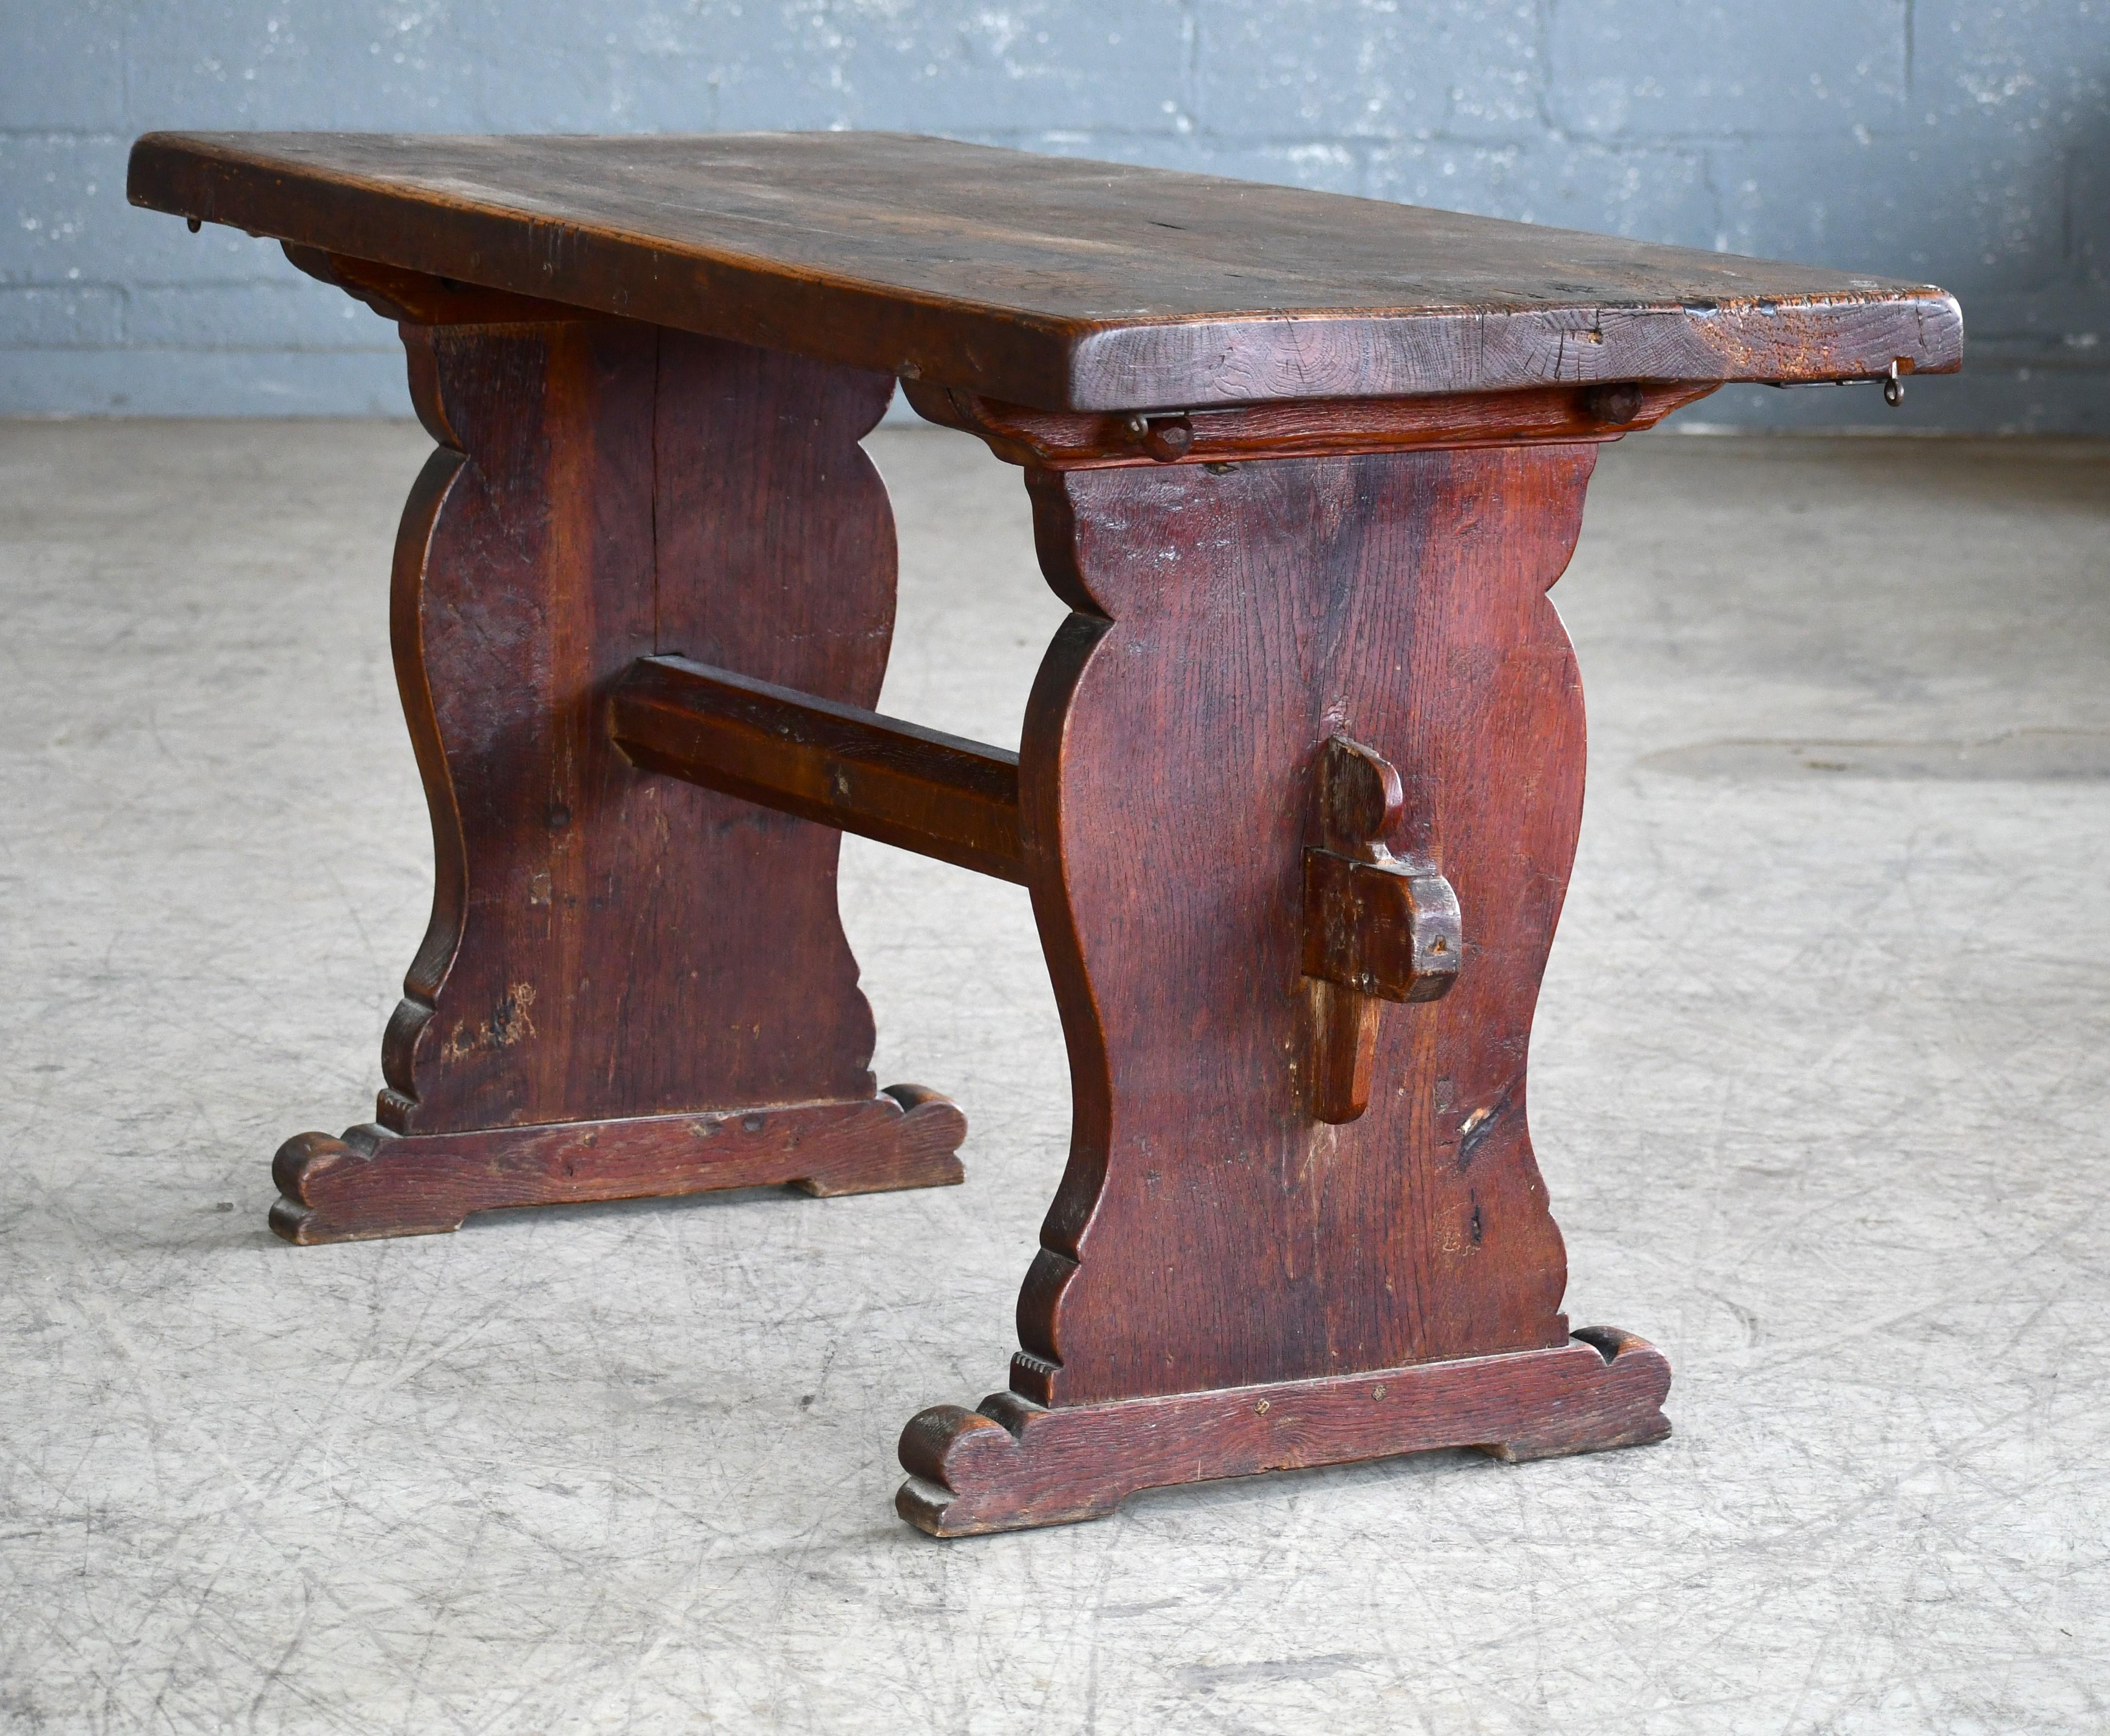 Danish Country Style Trellis Dining or Console Table in Oak, ca. Early 1900s For Sale 1